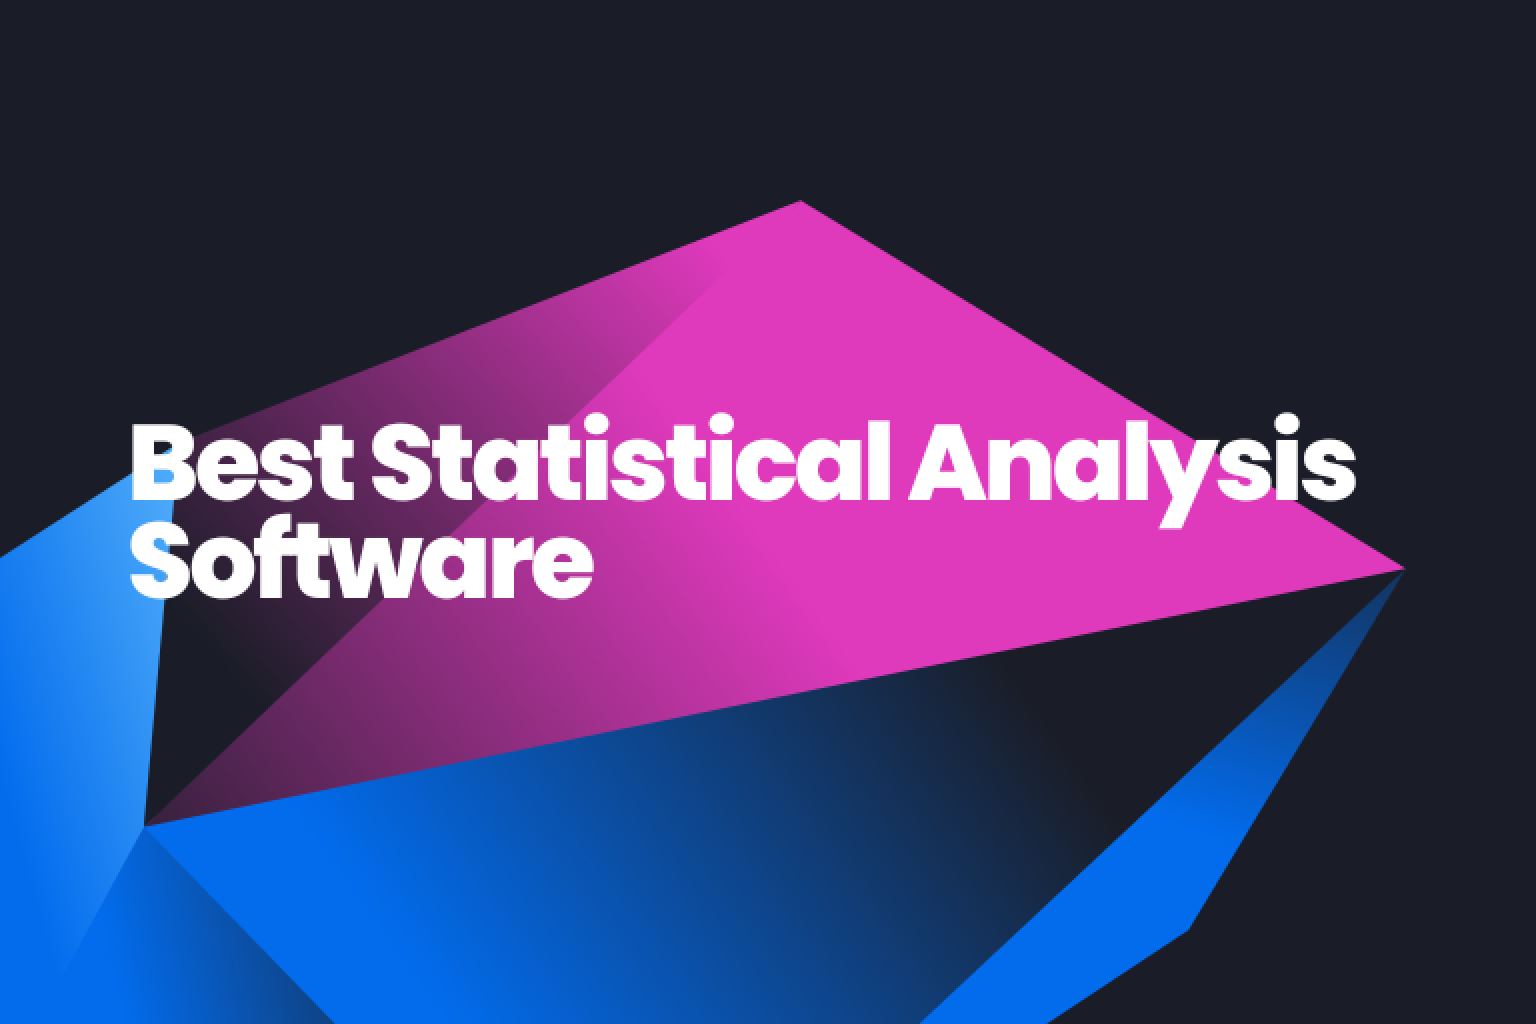 Discover the best statistical analysis software for data scientists, including SAS, Tableau, and RATH. Make smarter, data-driven decisions now!